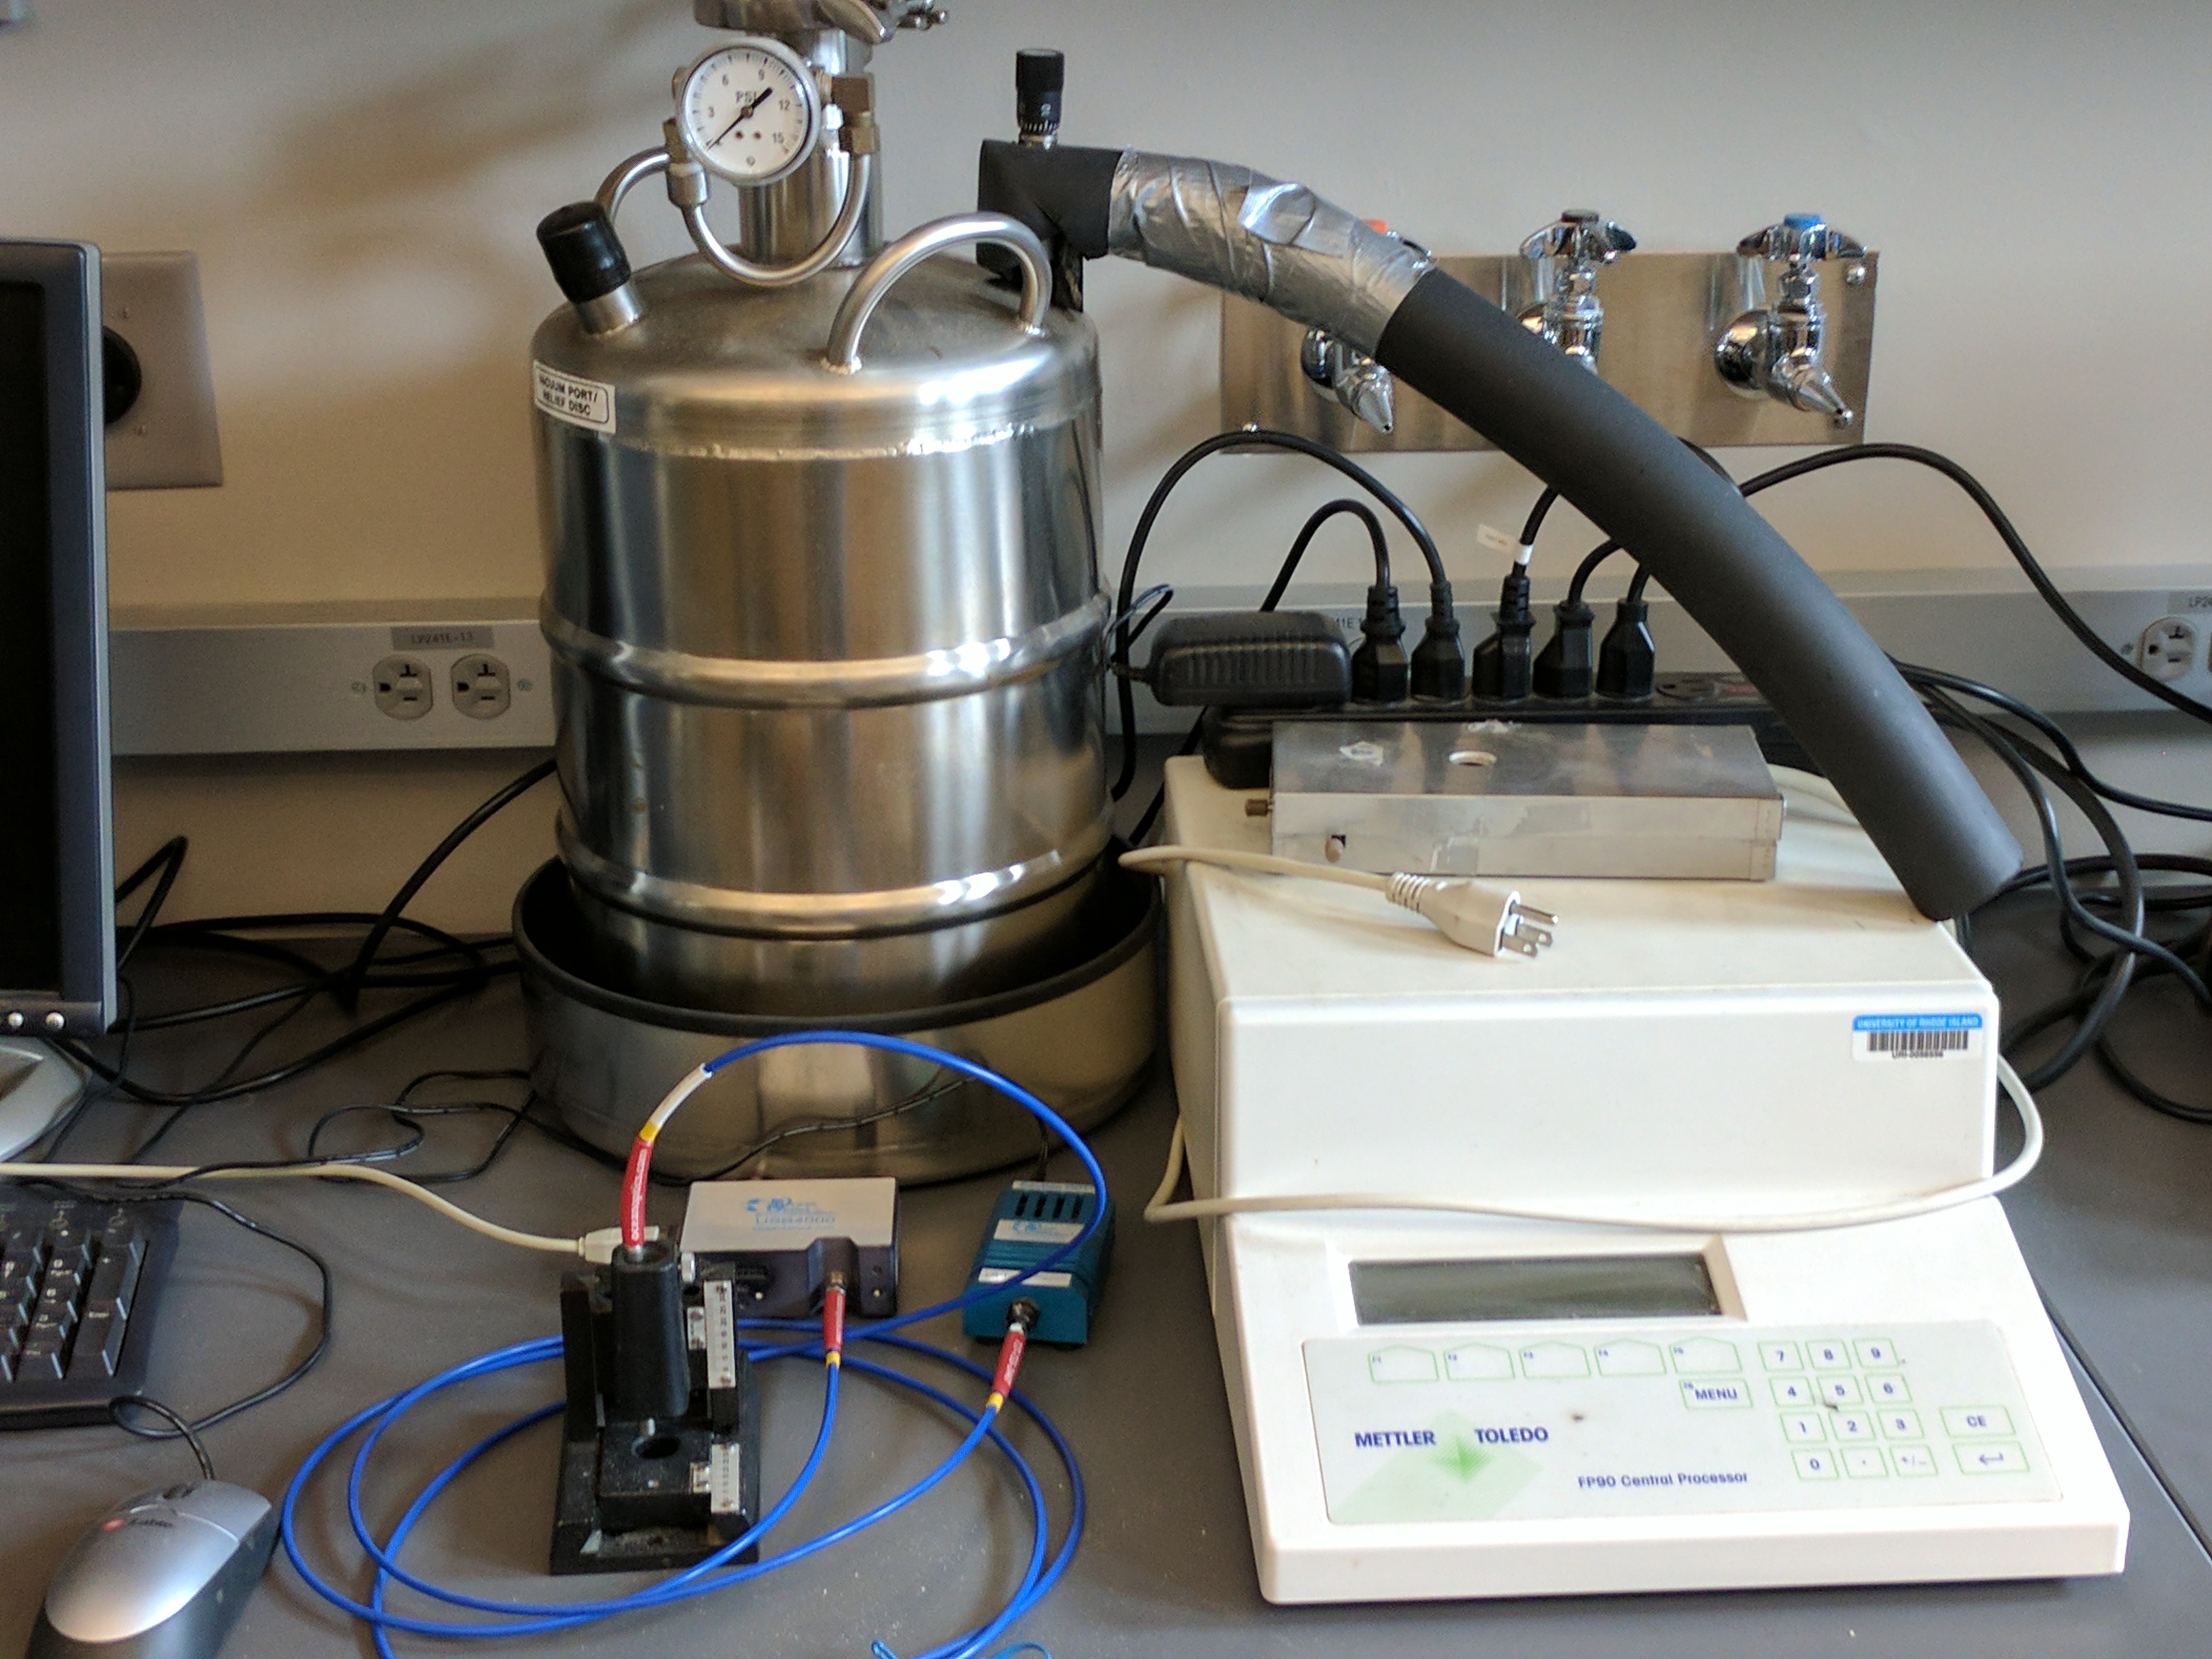 Mettler-Toledo Cold Stage: The cold-stage provides a constant temperature to a stage for samples placed on microscope slides. This is coupled with an Ocean-Optics reflectance spectrometer to allow measurement of spectra as a function of temperatures below ambient. 